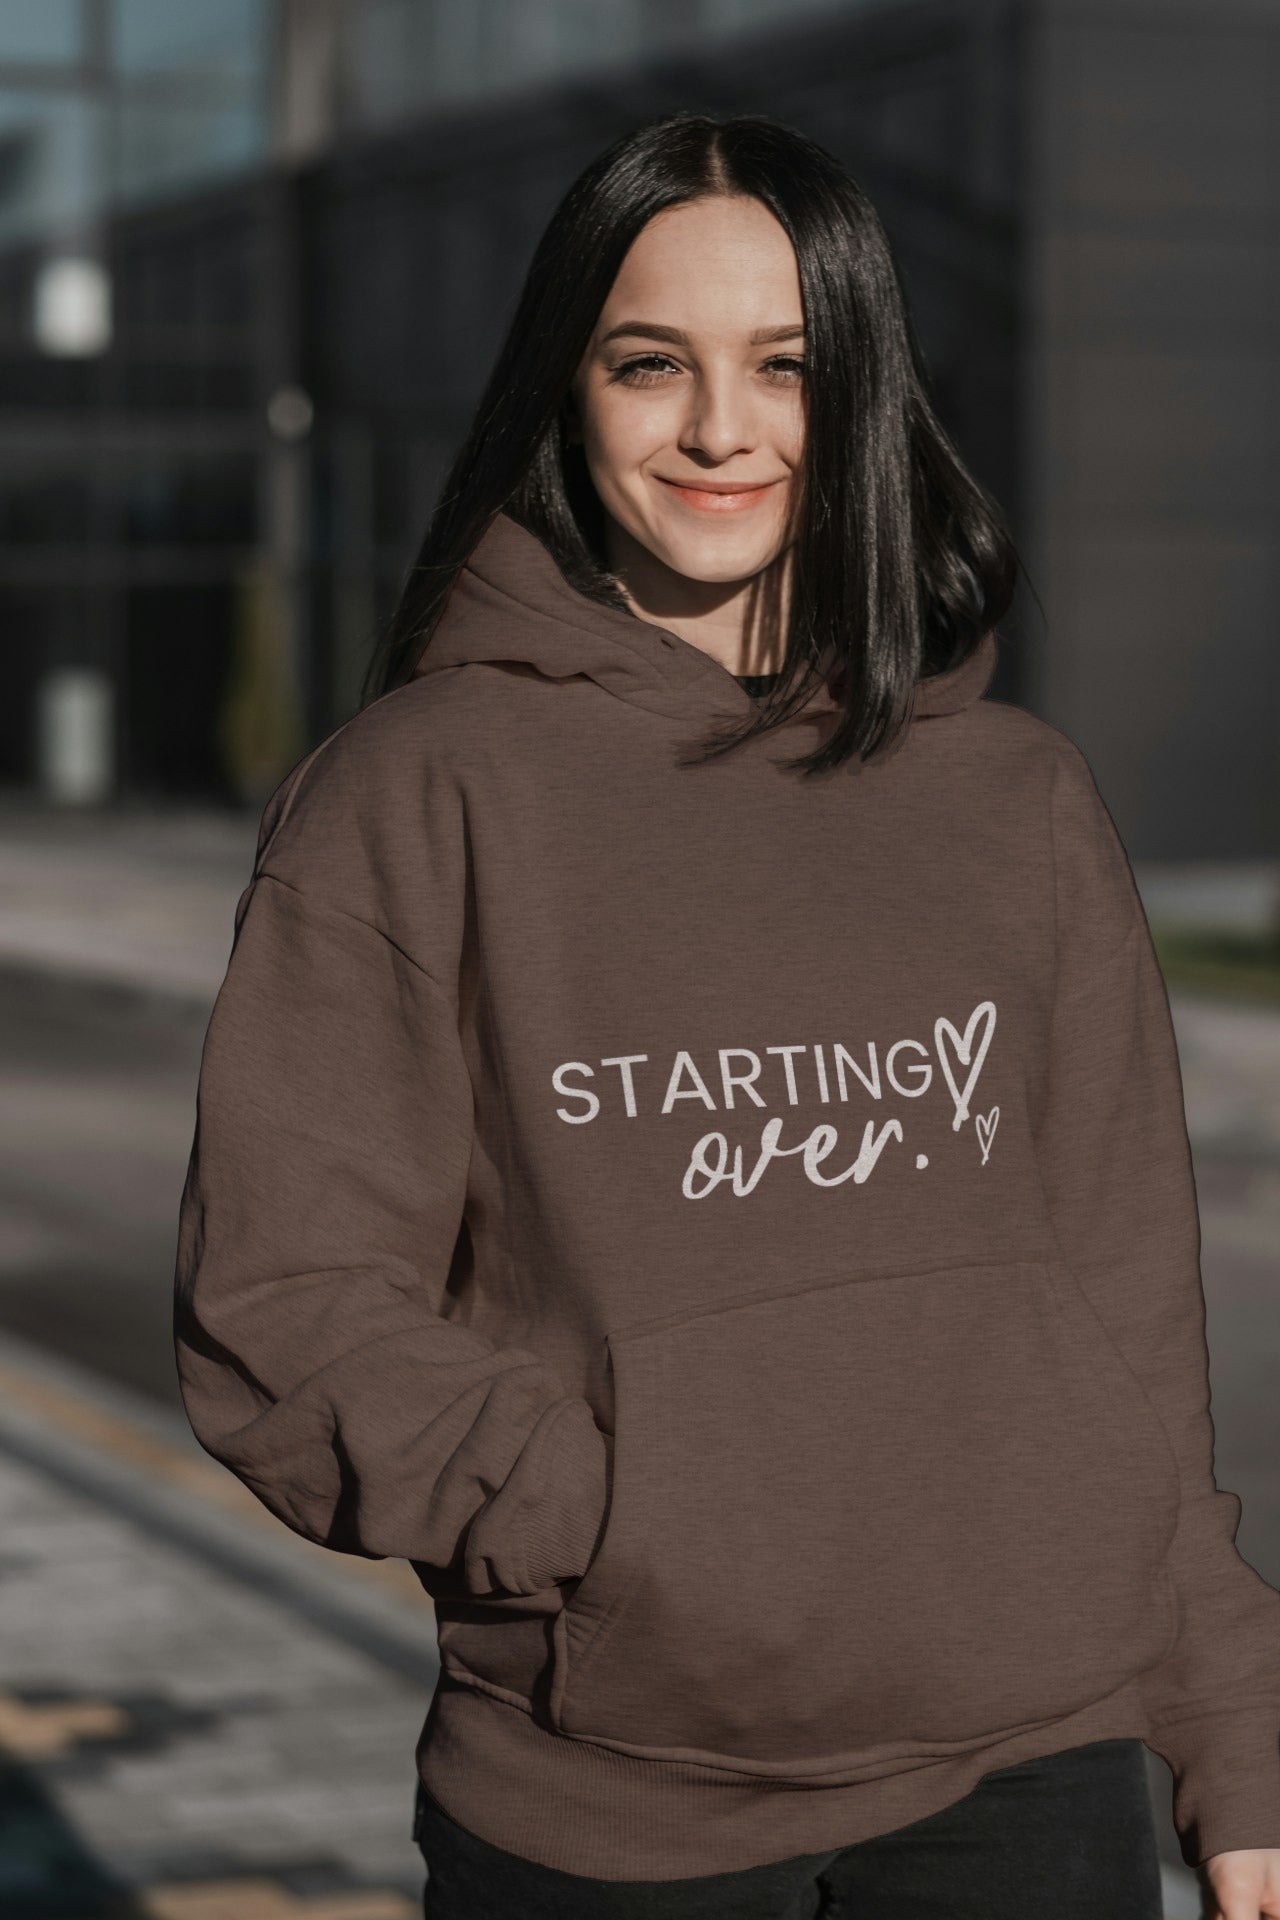 Sarantos -  STARTing over Items Collection